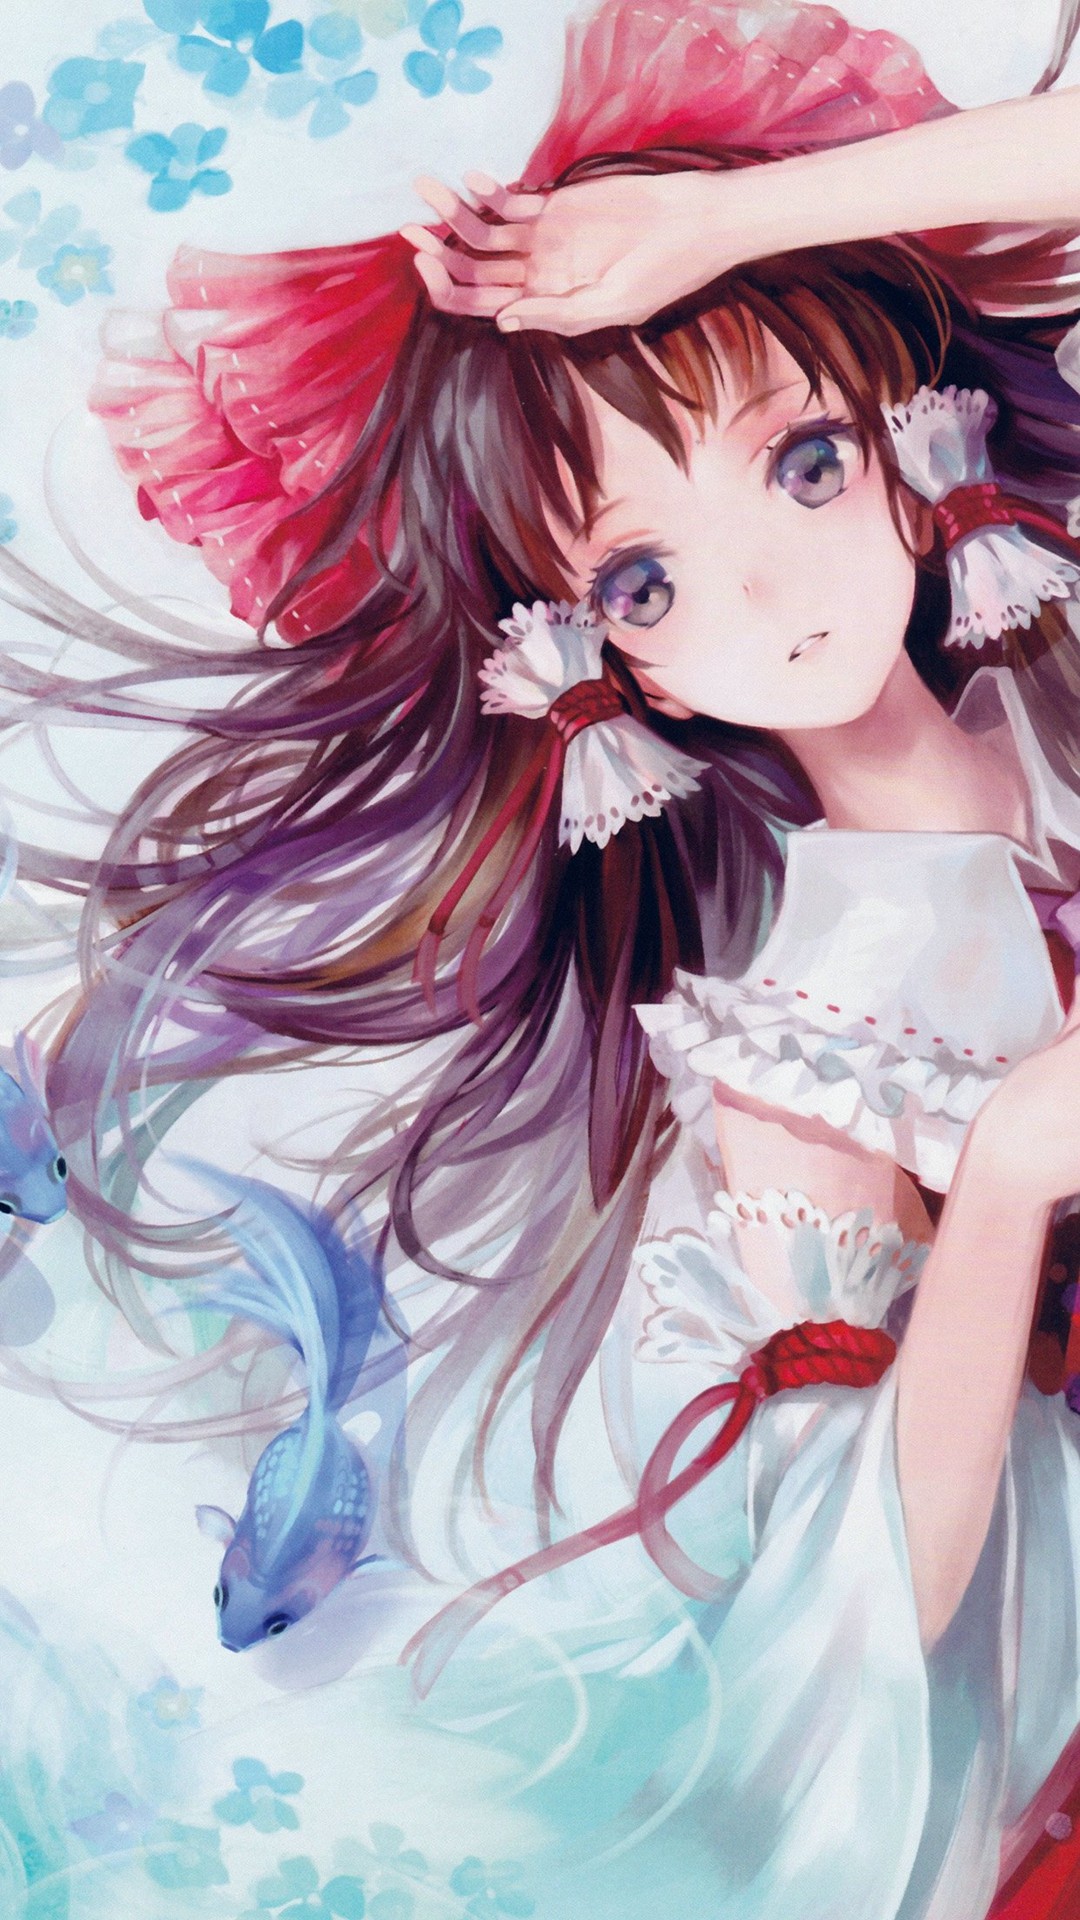 Cute Anime Girl Iphone Wallpapers